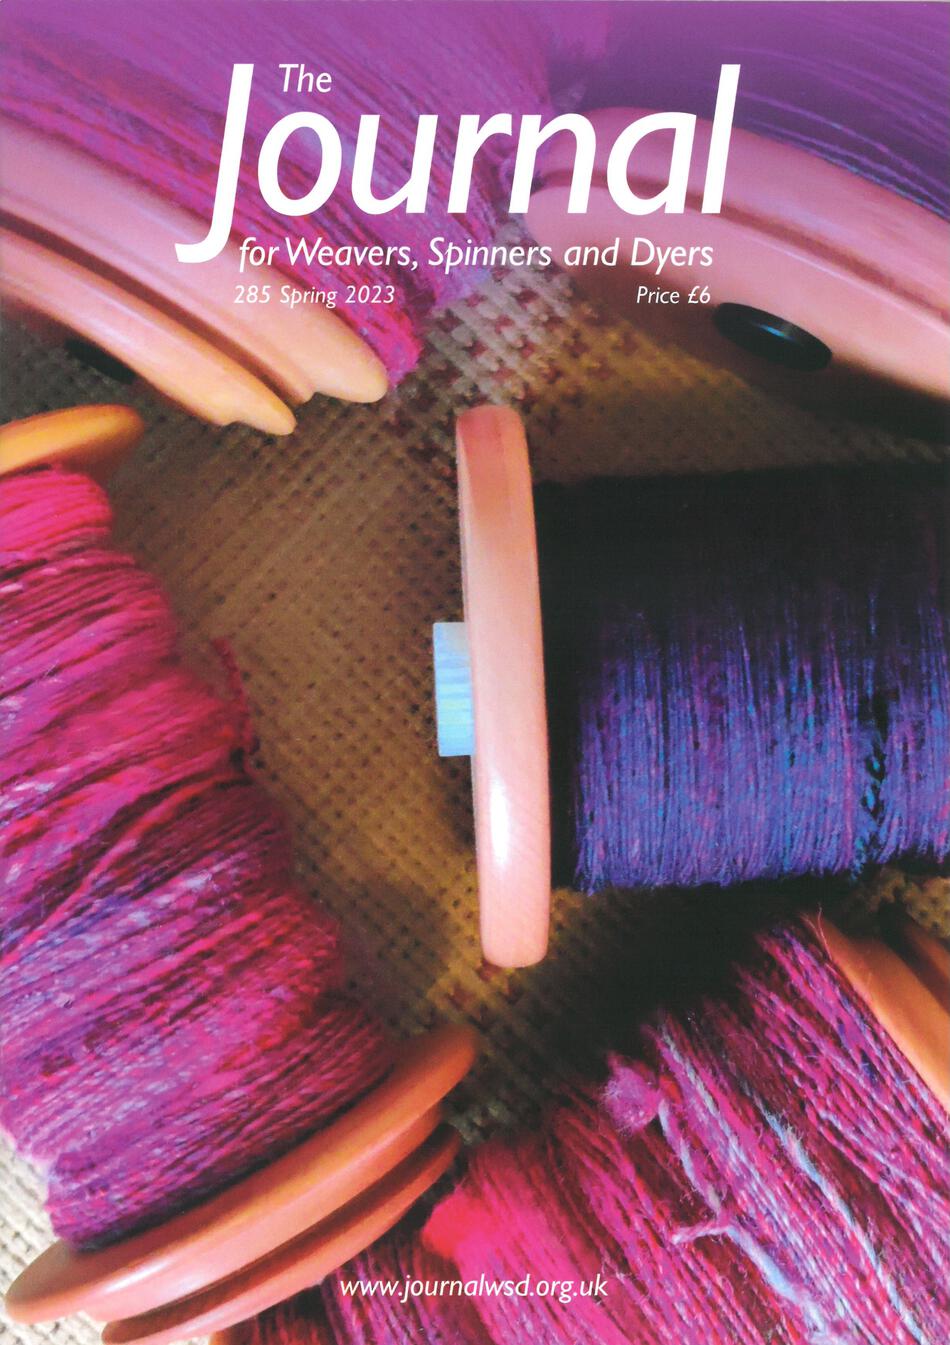 Weaving Magazines The Journal For Weavers Spinners and Dyers  UK  285 Spring 2023